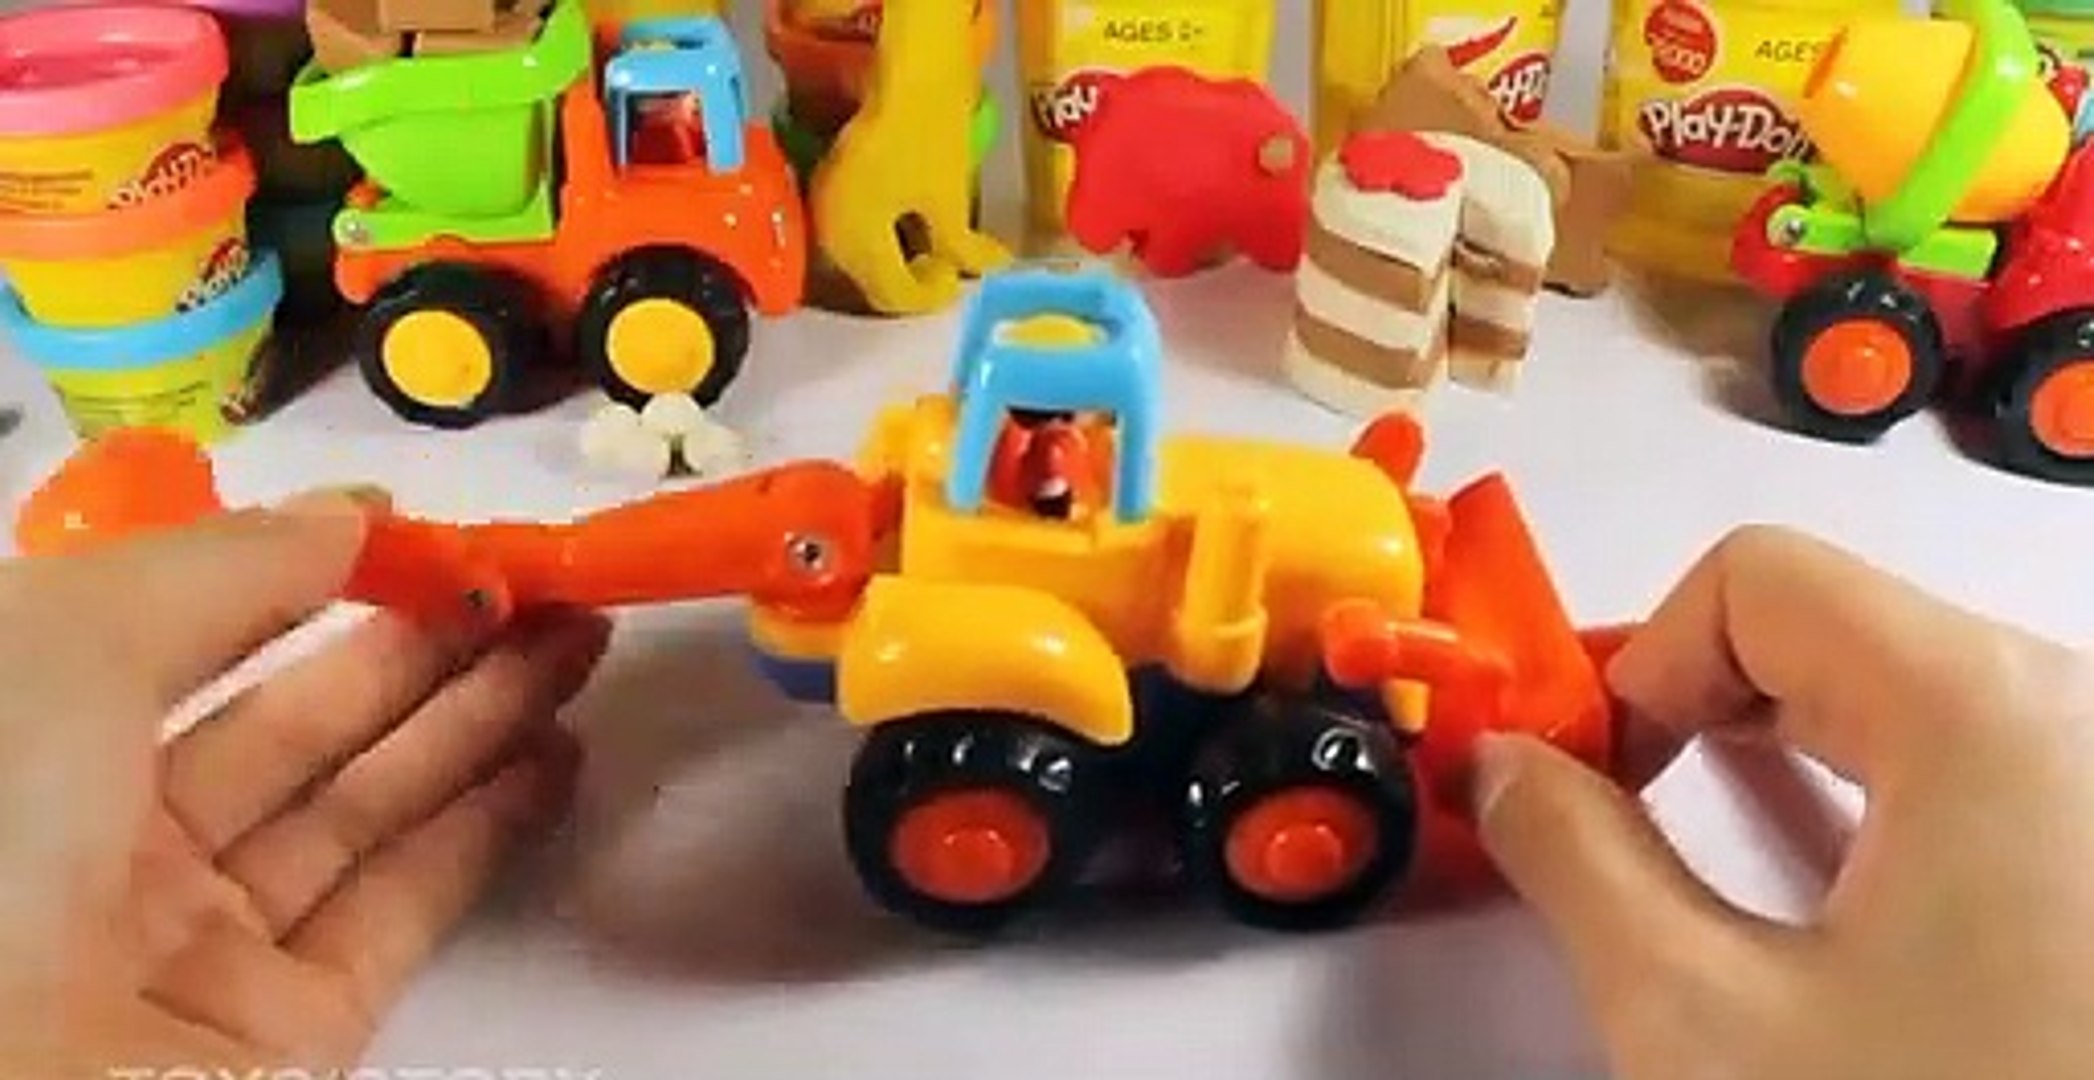 Play Cars Toy For Kids  How To Make Play Cake Video Play Doh -Kids -VIdeos NY